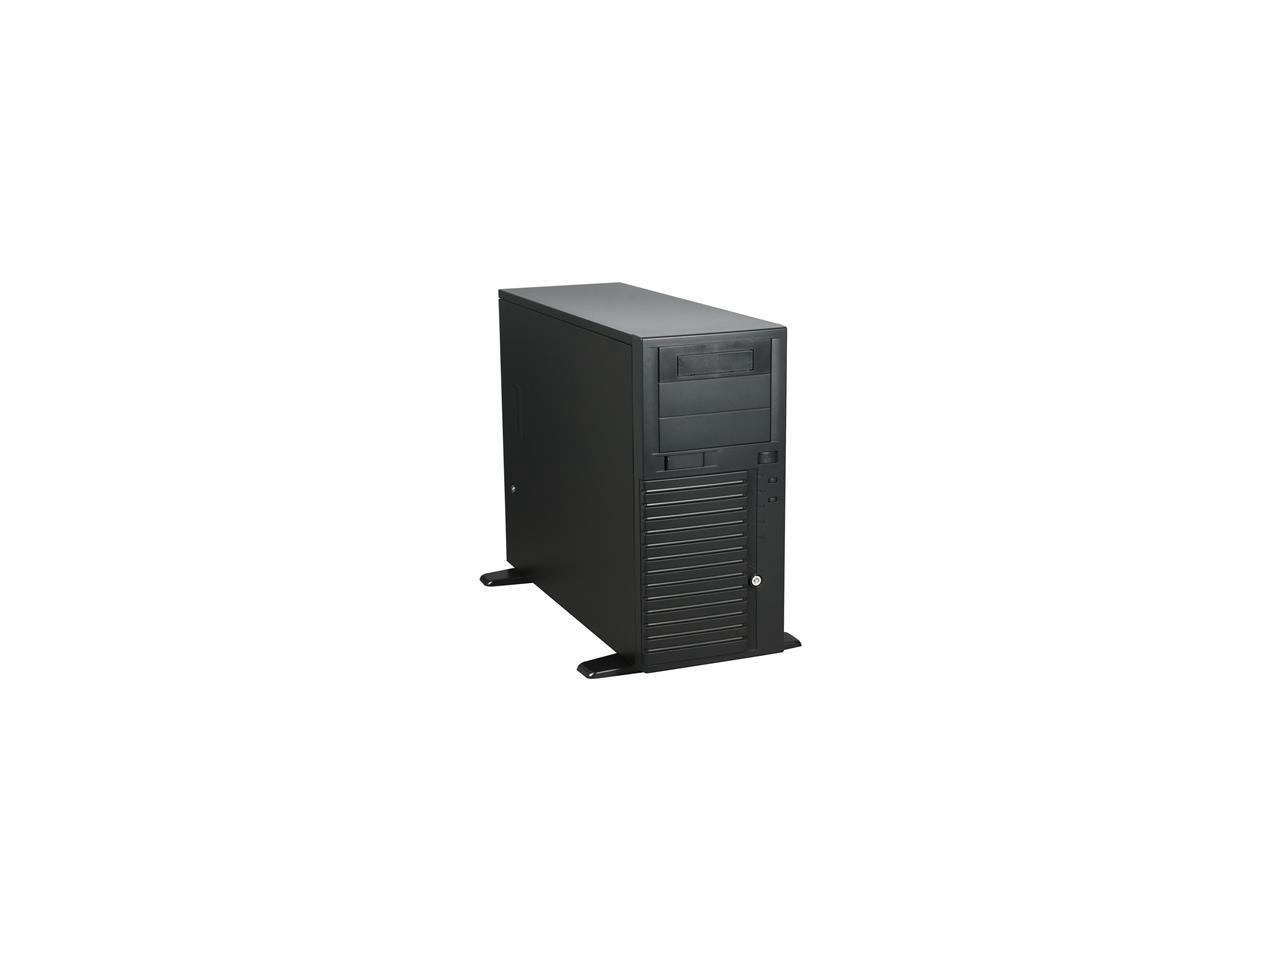 Chenbro Sr10569-Co 0.8Mm Secc Pedestal Main Streaming Server/Workstation Chassis 3 External 5.25" Drive Bays